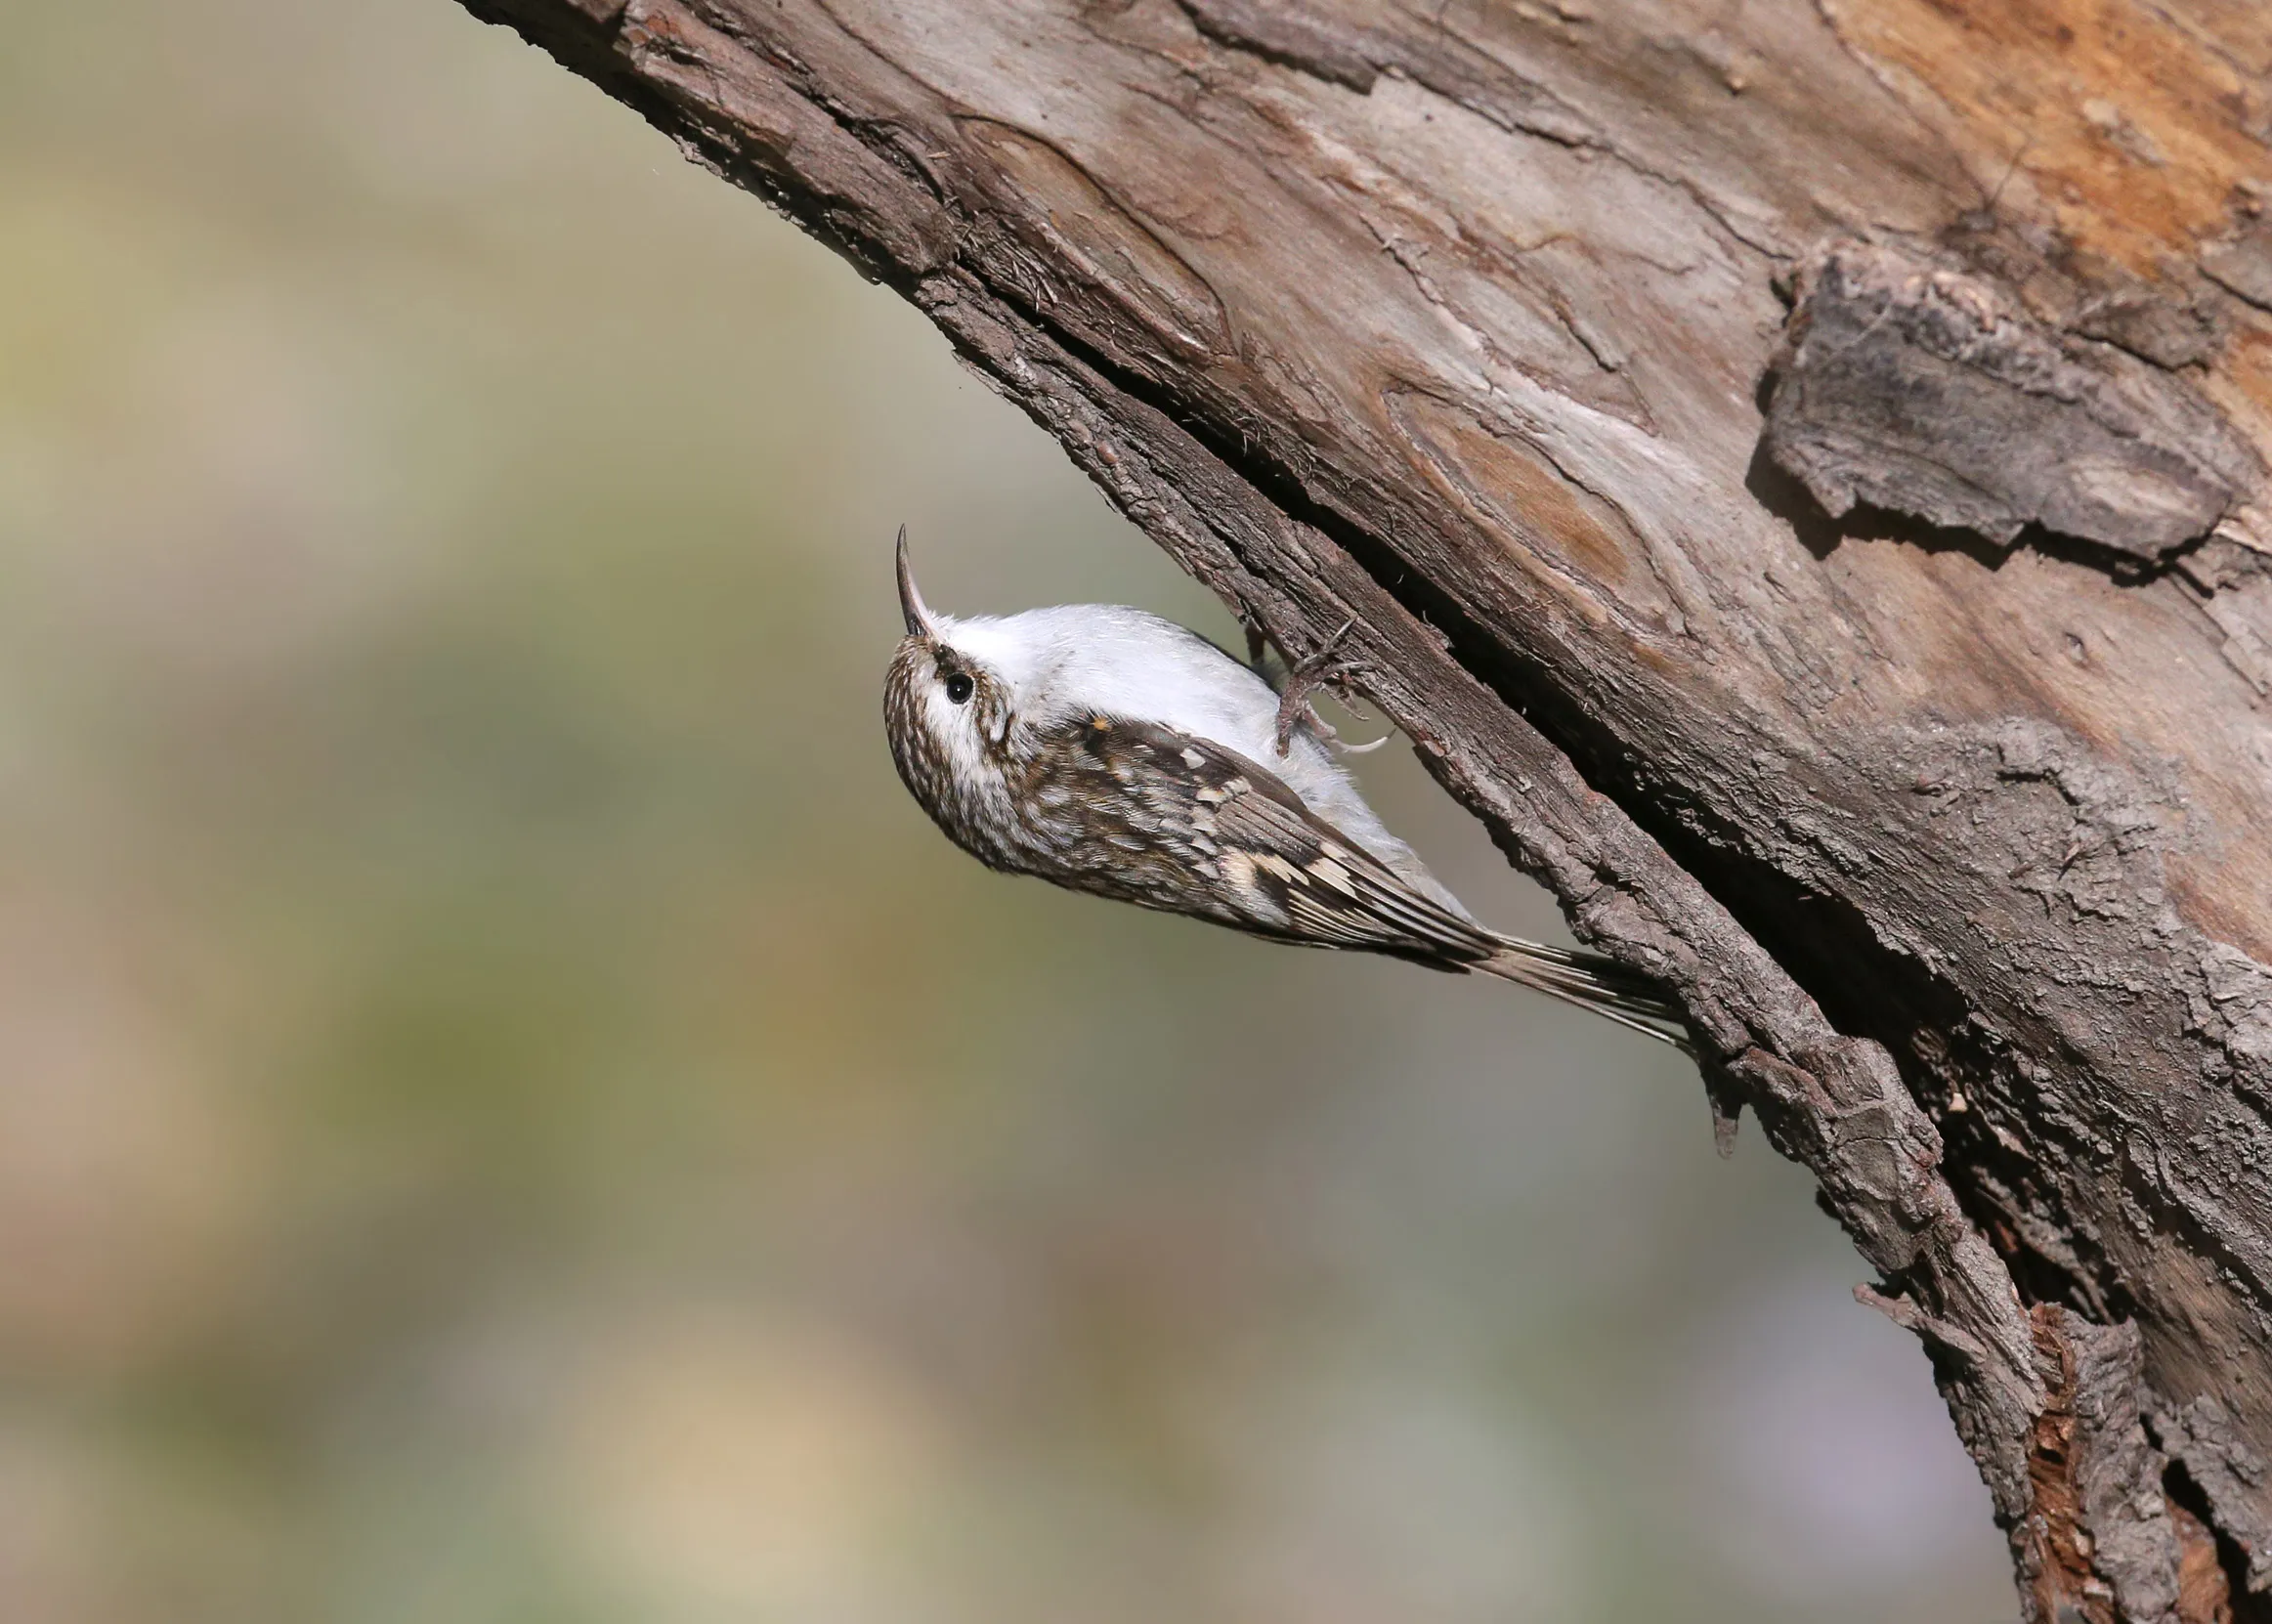 A Treecreeper clinging to the underside of a thick, diagonal tree branch